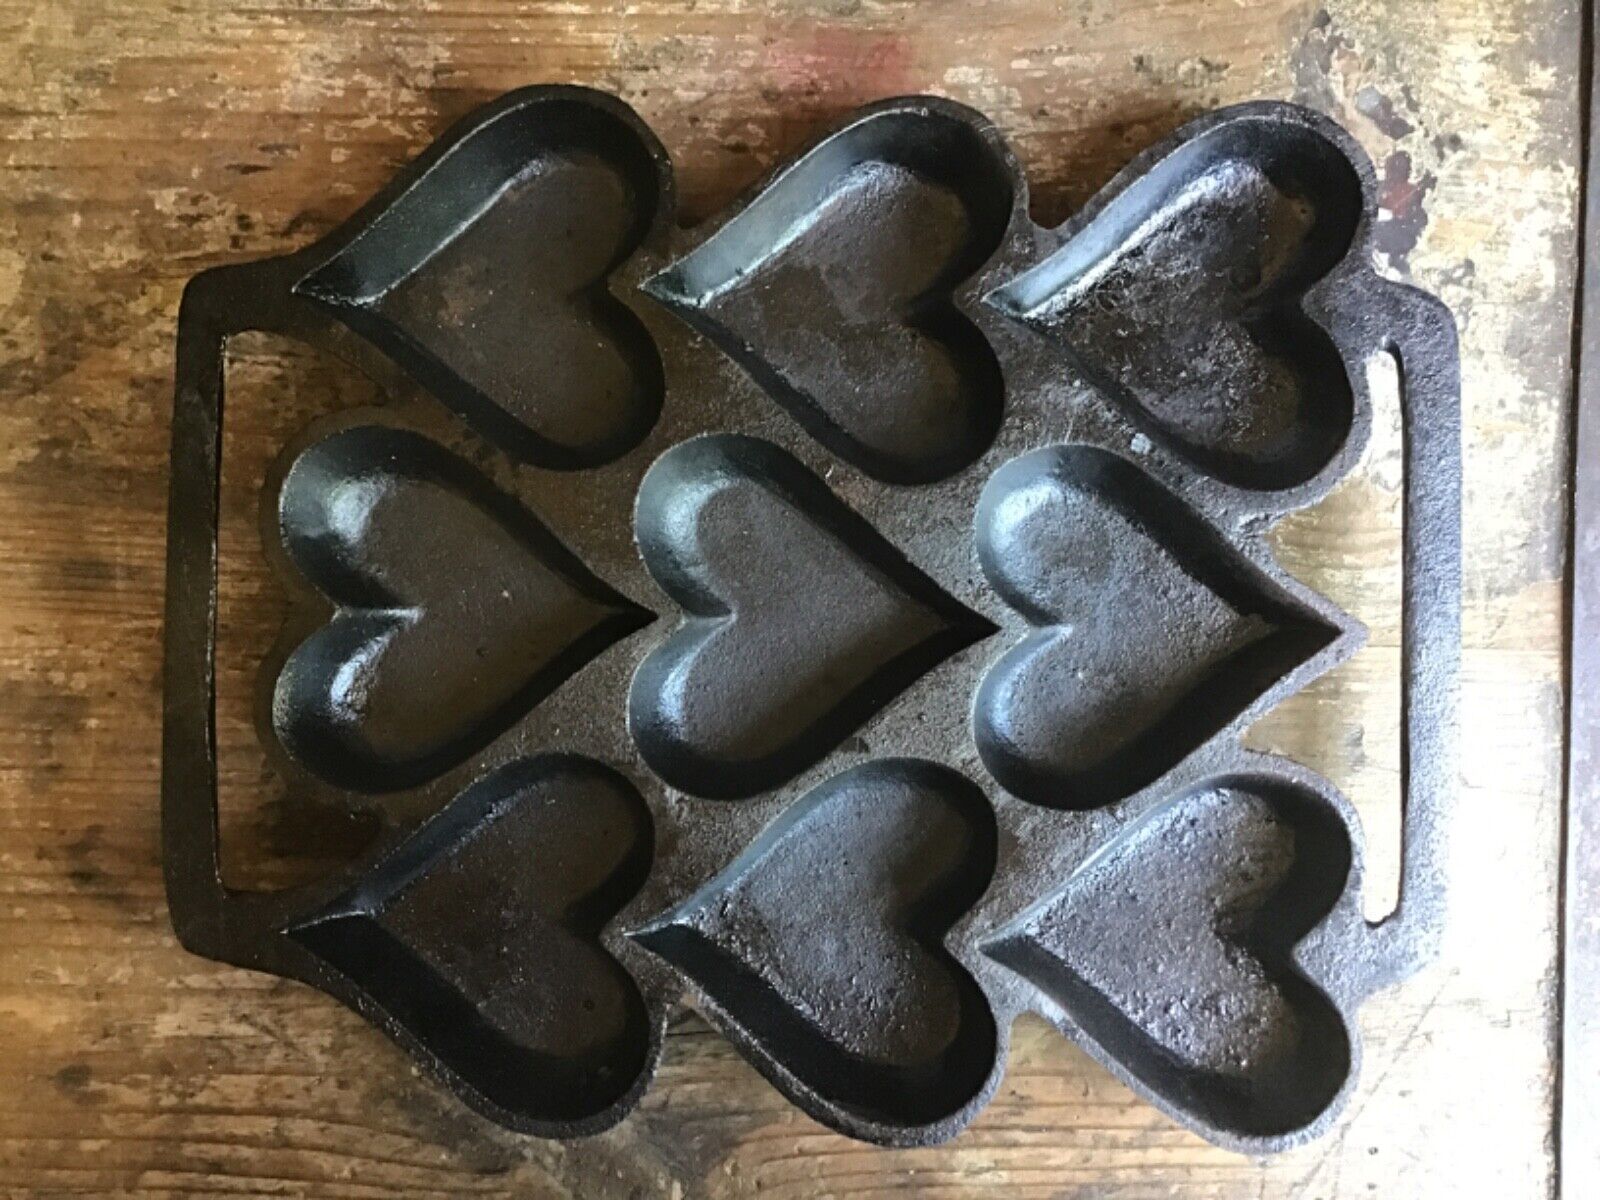 Vintage Cast Iron Heart-shaped Molds Muffin Baking Pan Kitchen Farmhouse Rustic